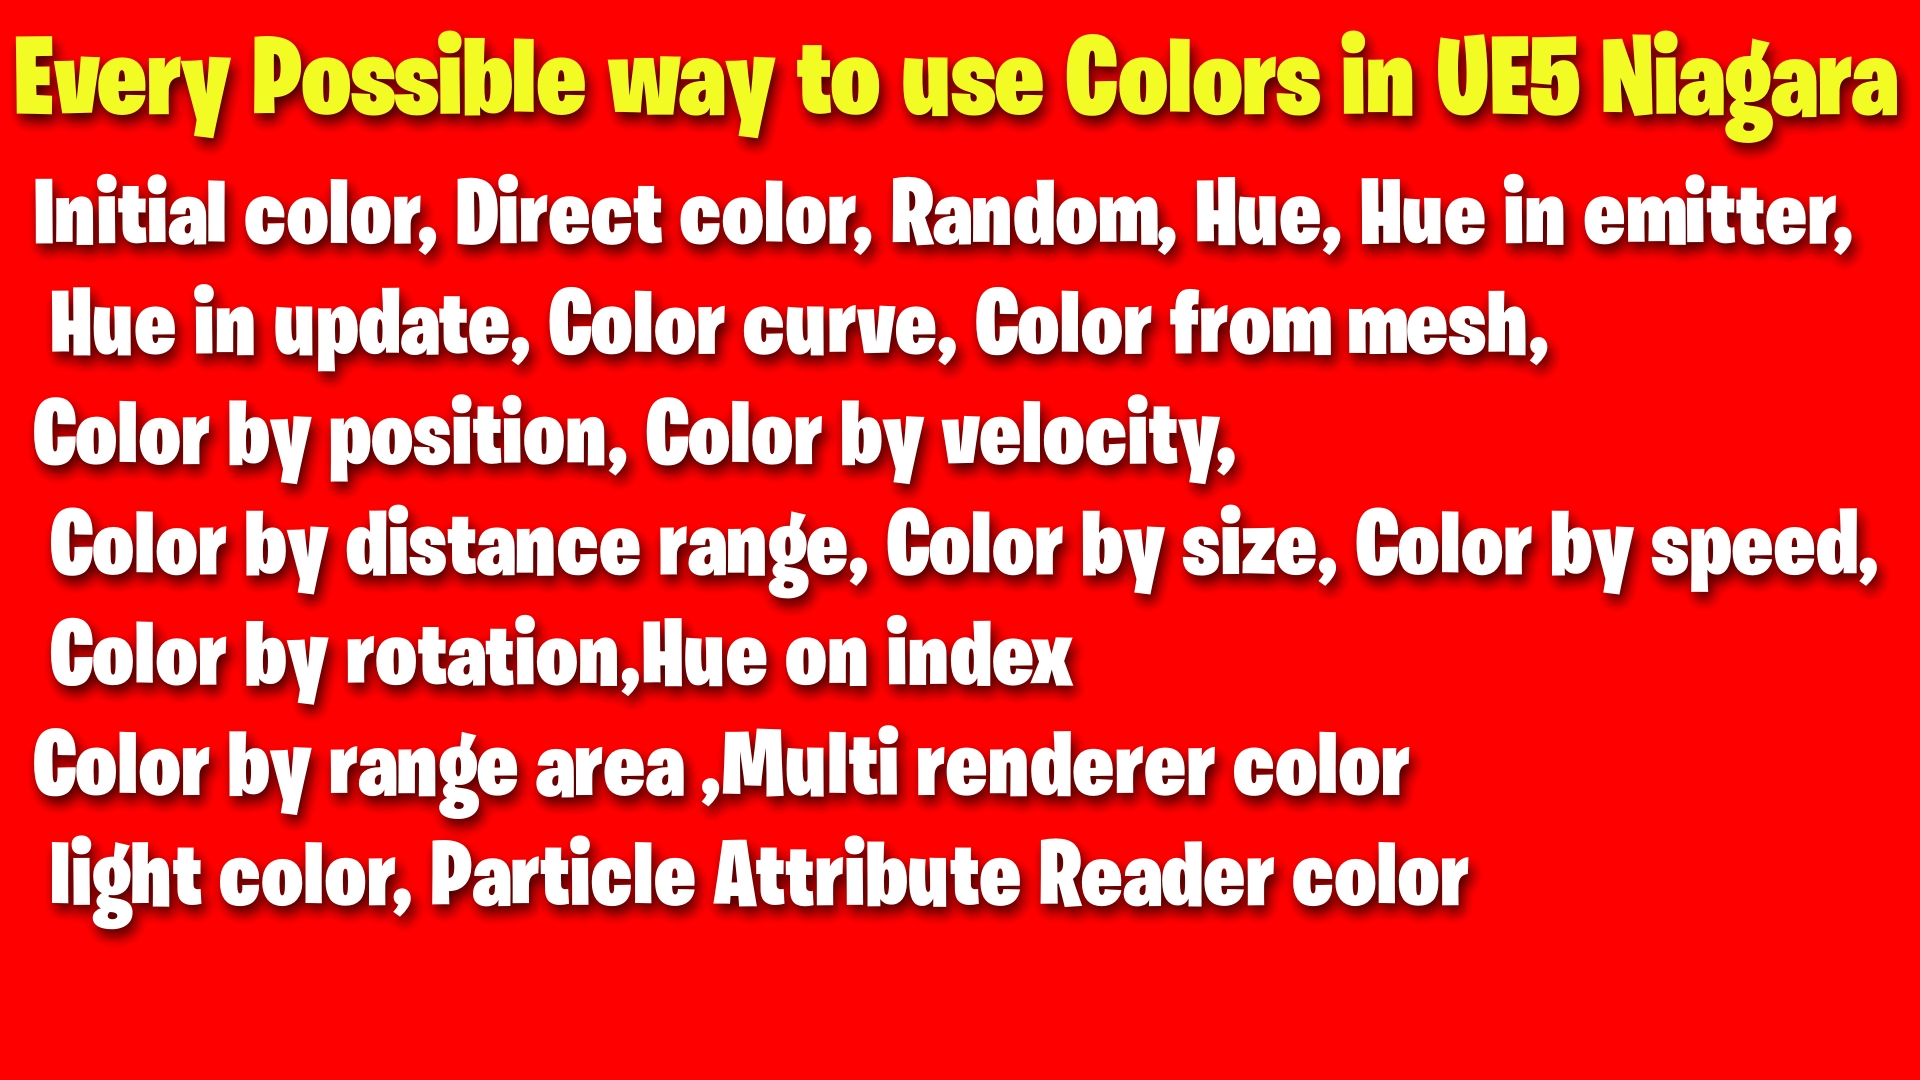 Every Possible way to use colors in ue5 niagara.jpg